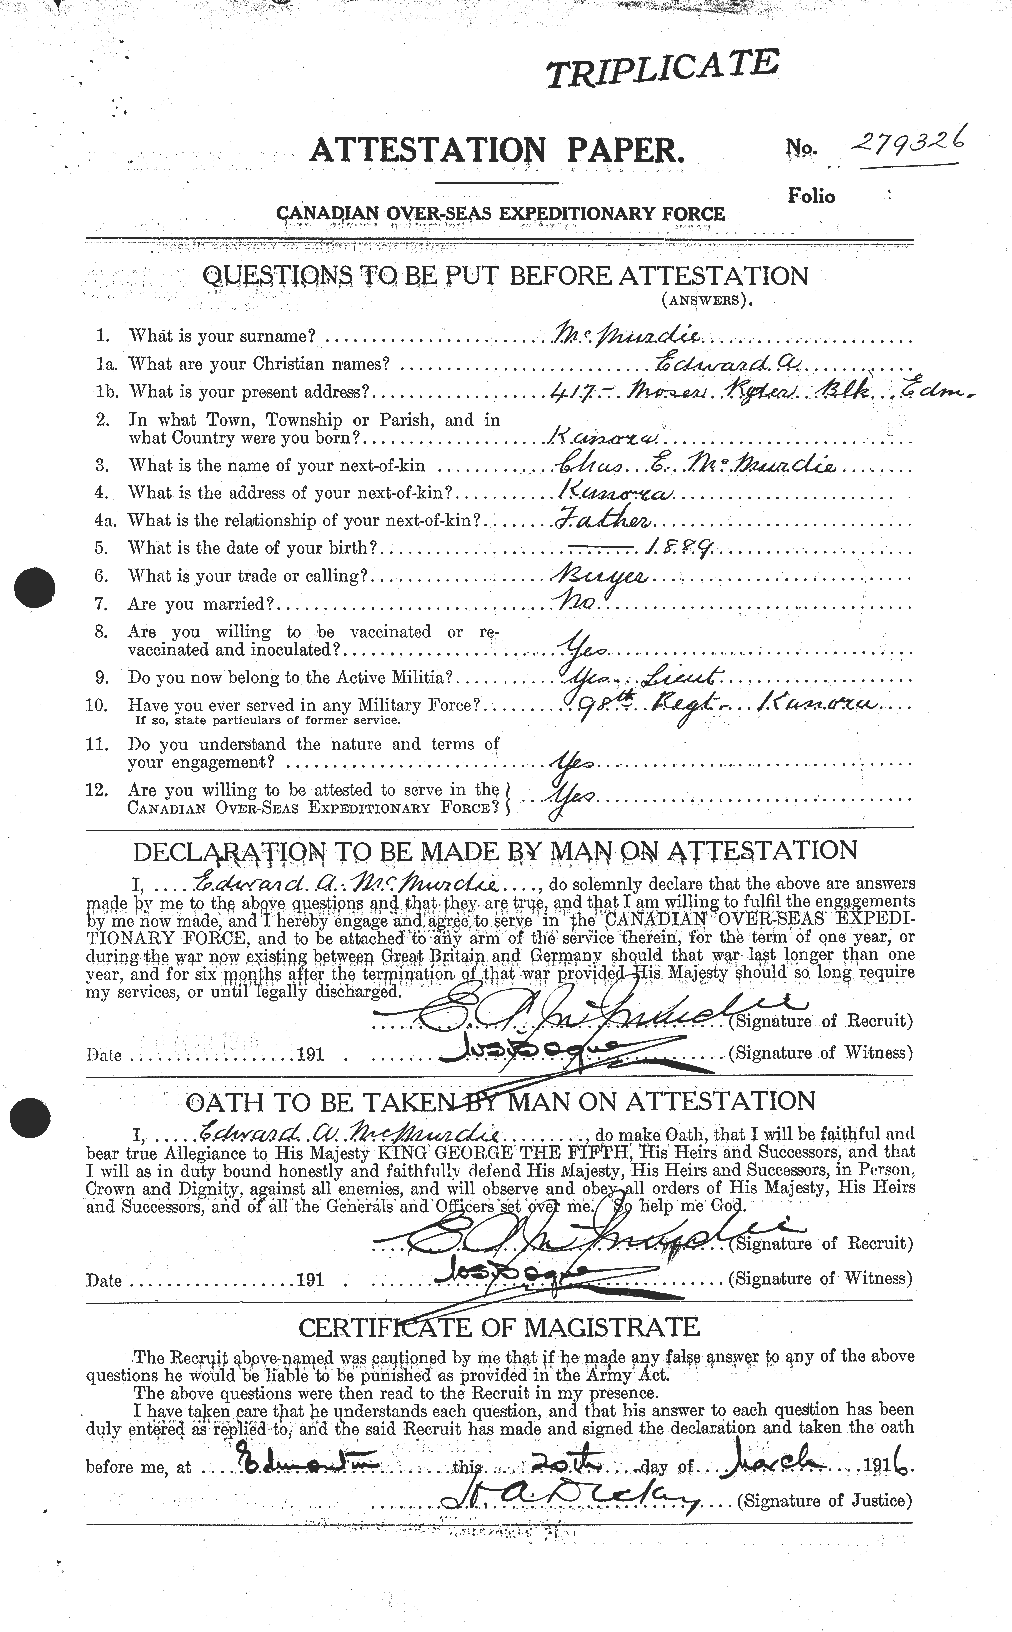 Personnel Records of the First World War - CEF 539365a